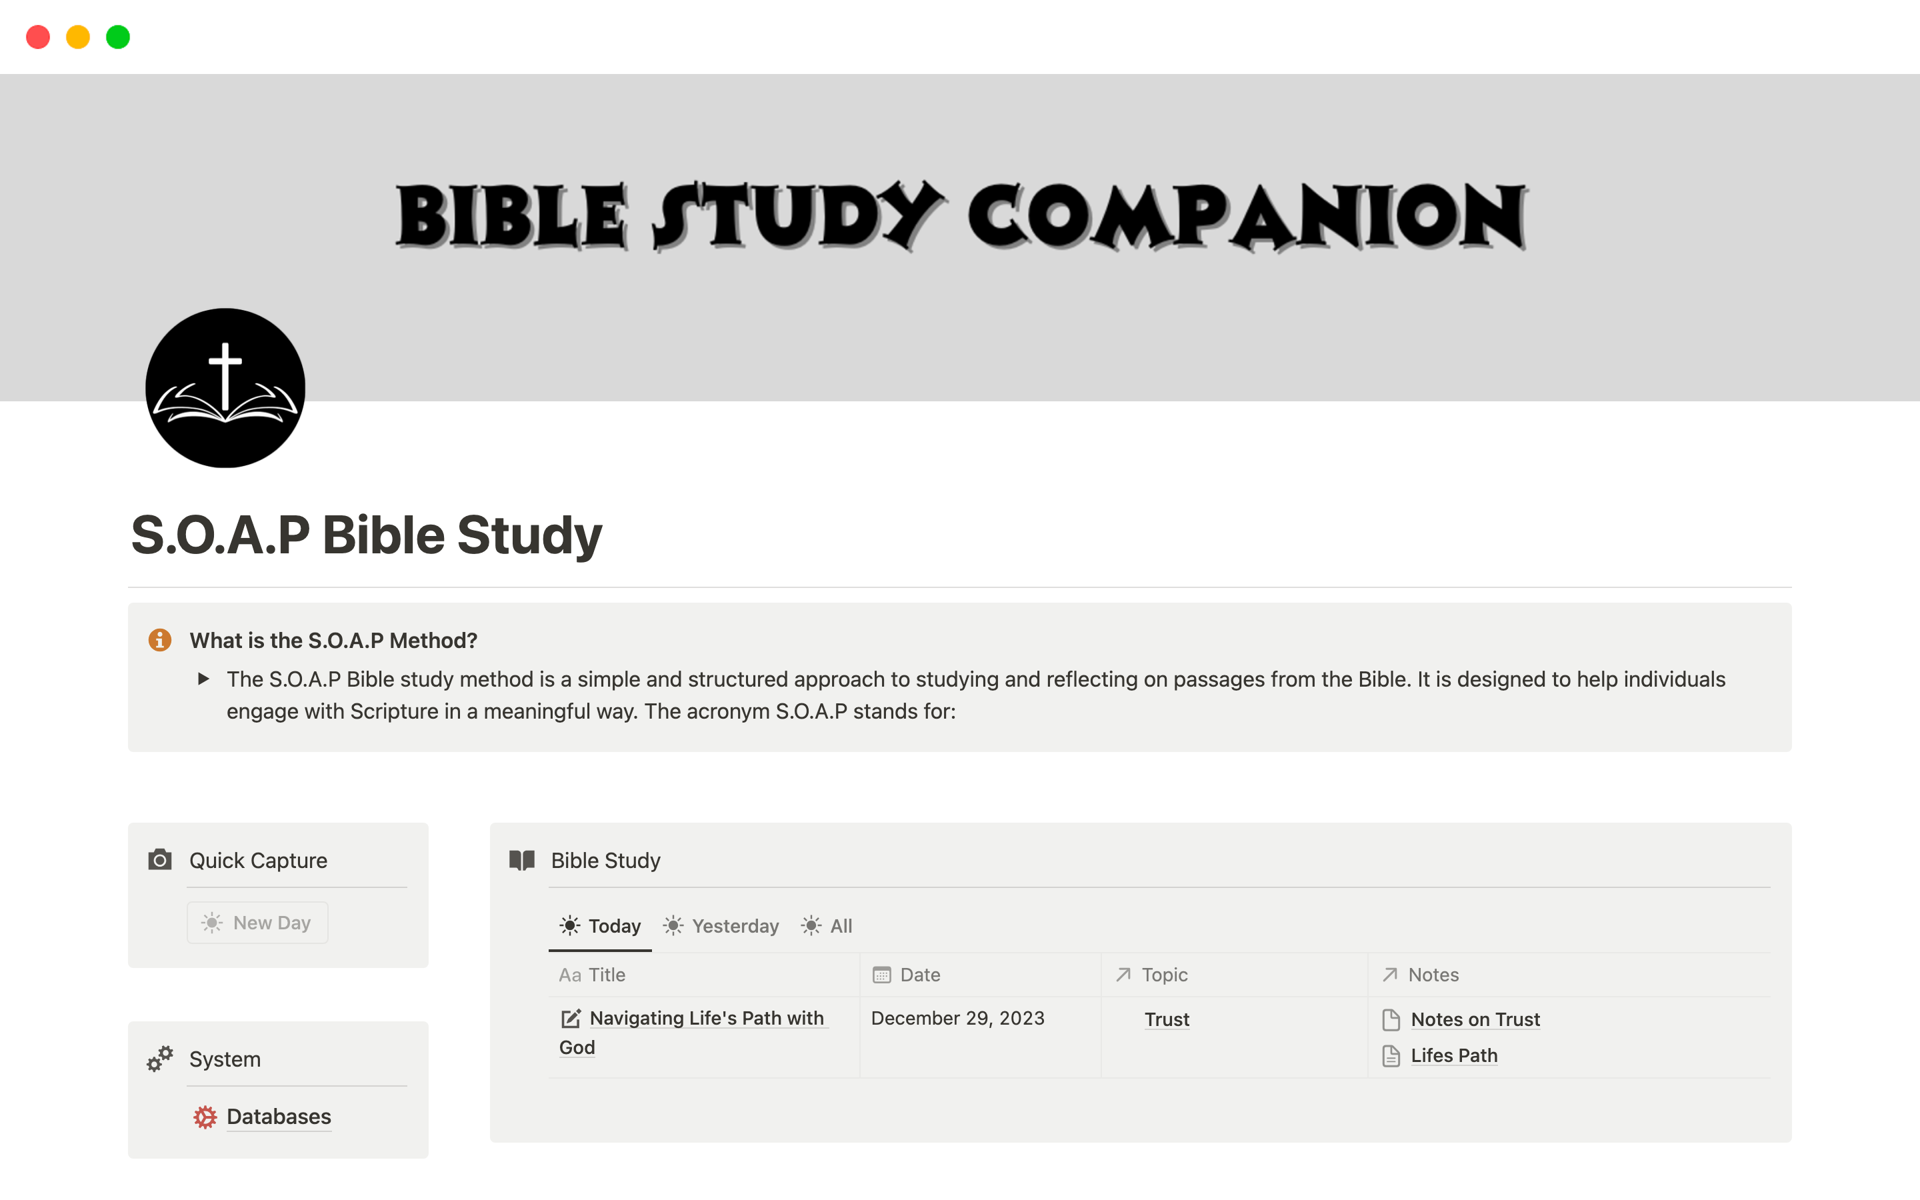 "The Bible Study Companion" is a digital tool designed to enhance your Bible study experience, featuring an intuitive all-in-one dashboard and the structured S.O.A.P method for in-depth scripture analysis.